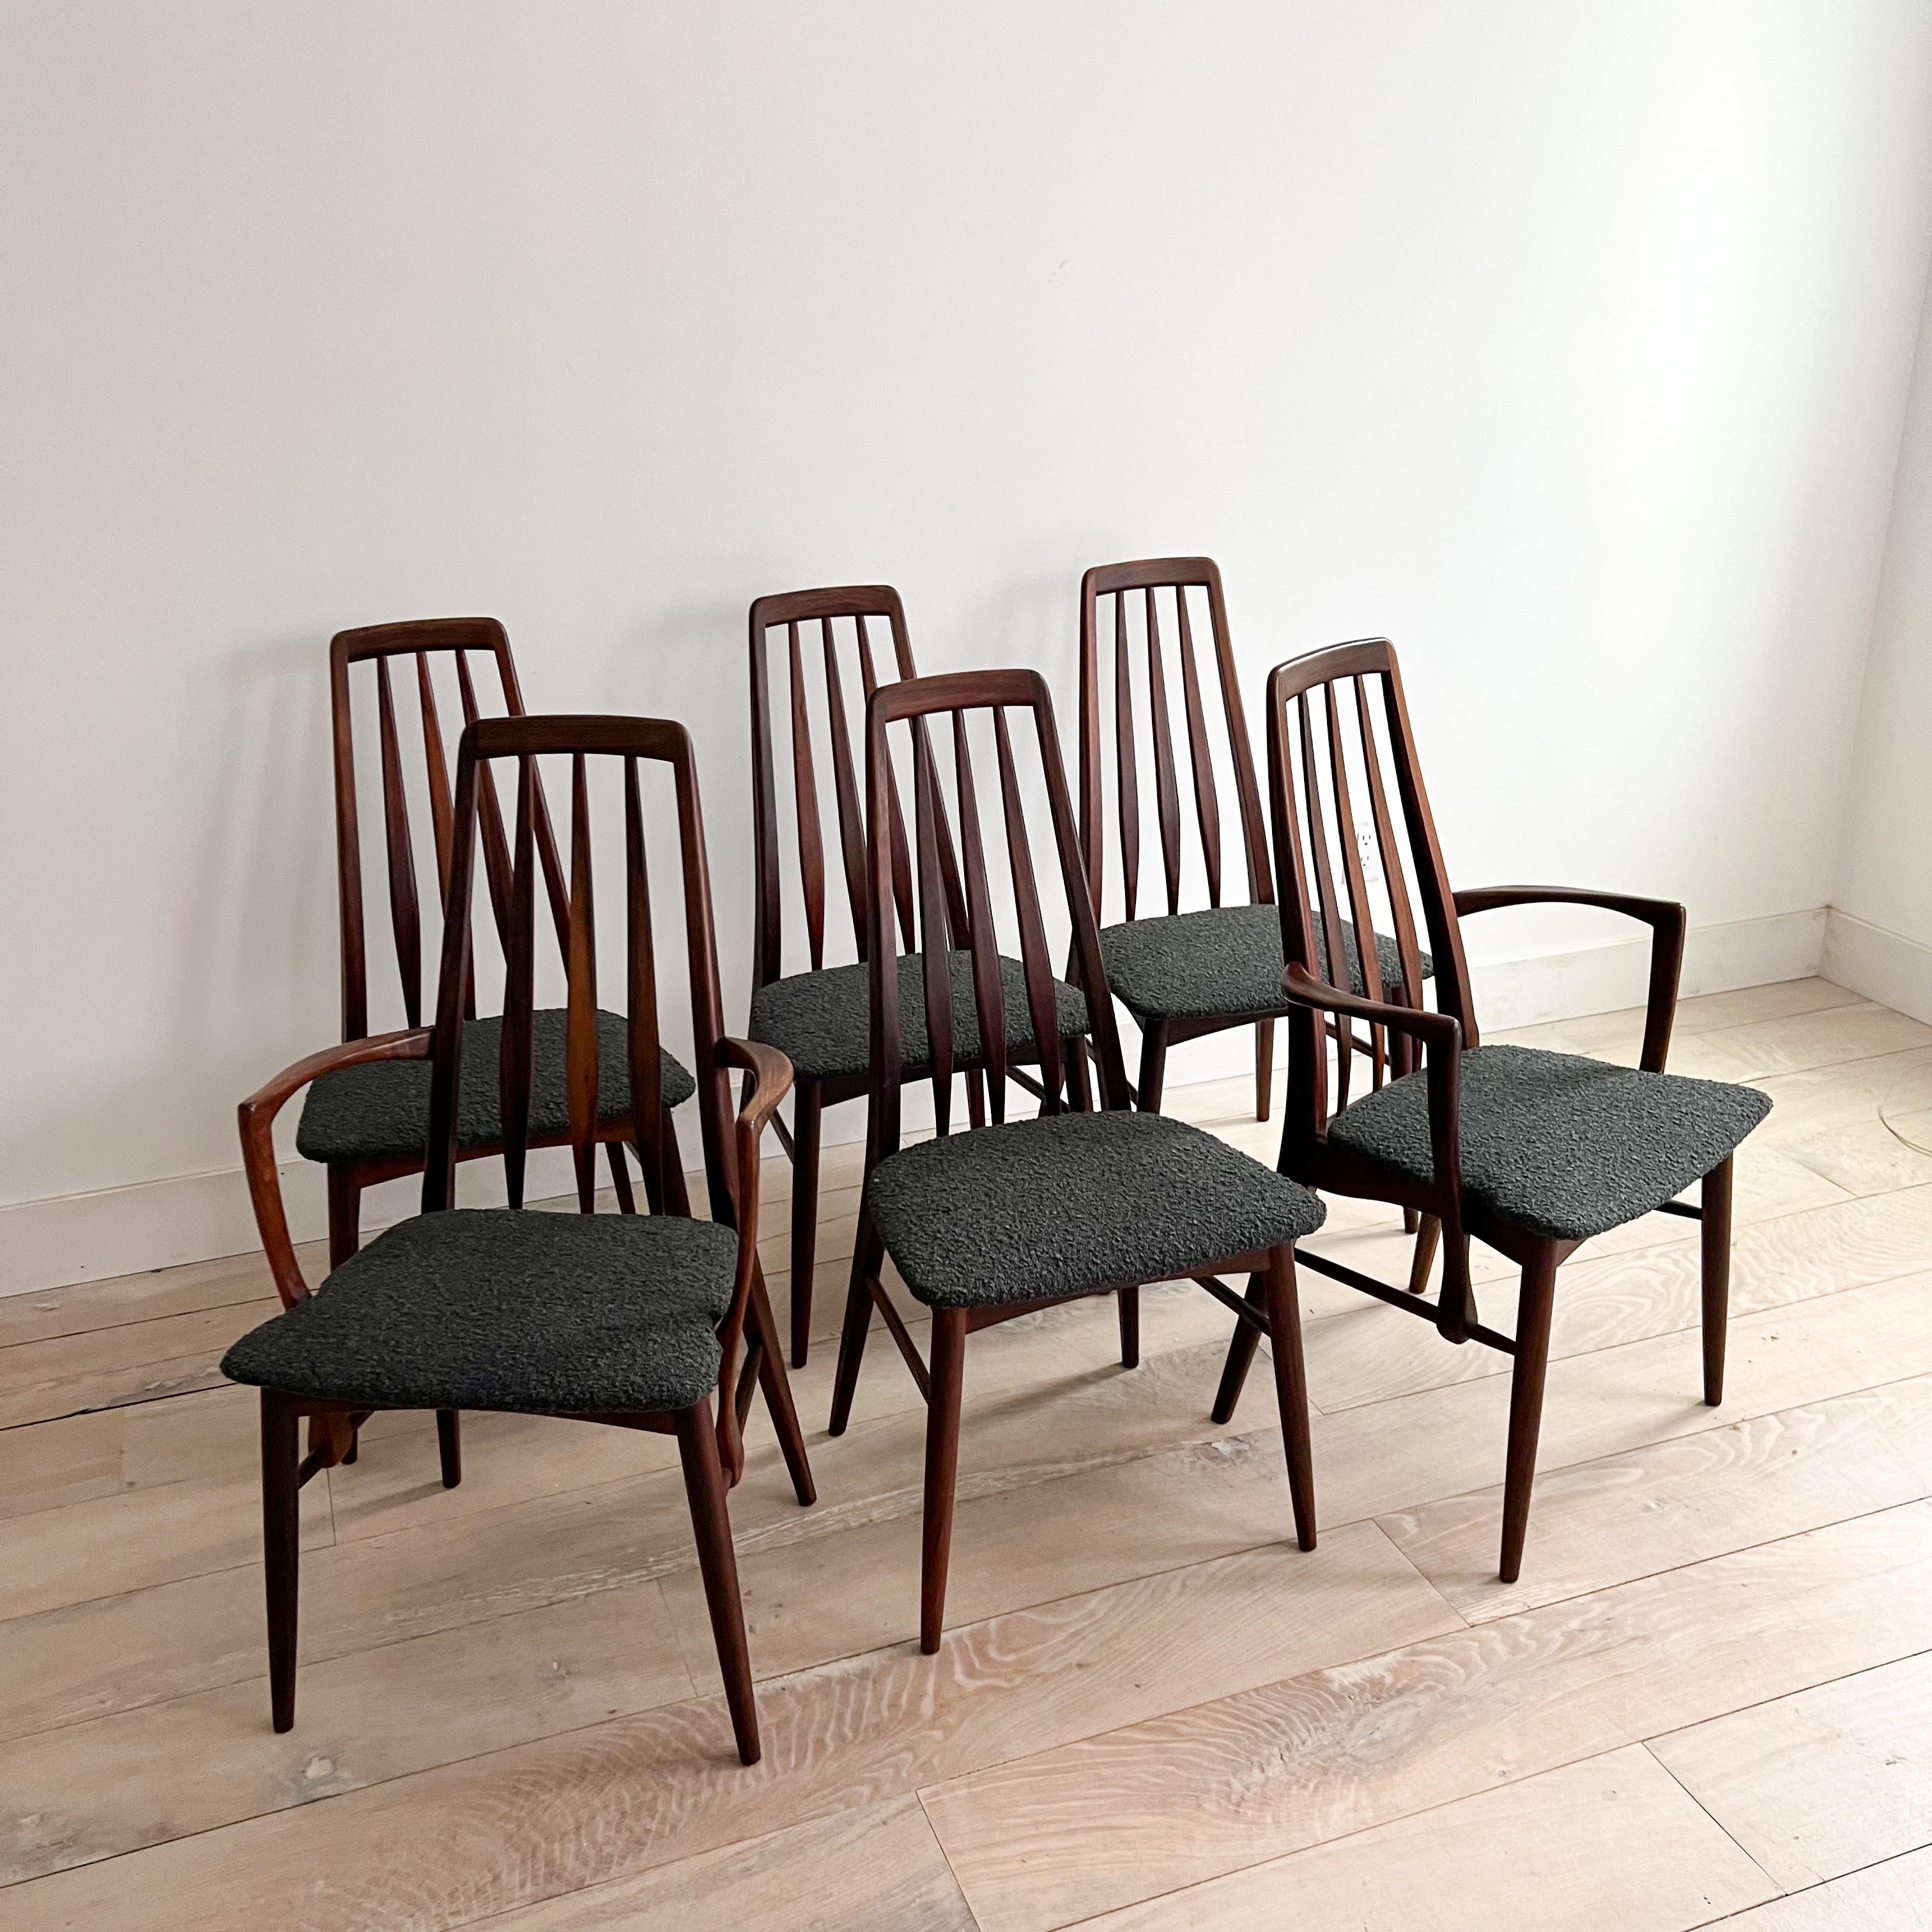 Elevate your dining experience with this stunning set of 6 mid-century modern dining chairs by Neils Koefoed, renowned for their exceptional craftsmanship. Known as the 